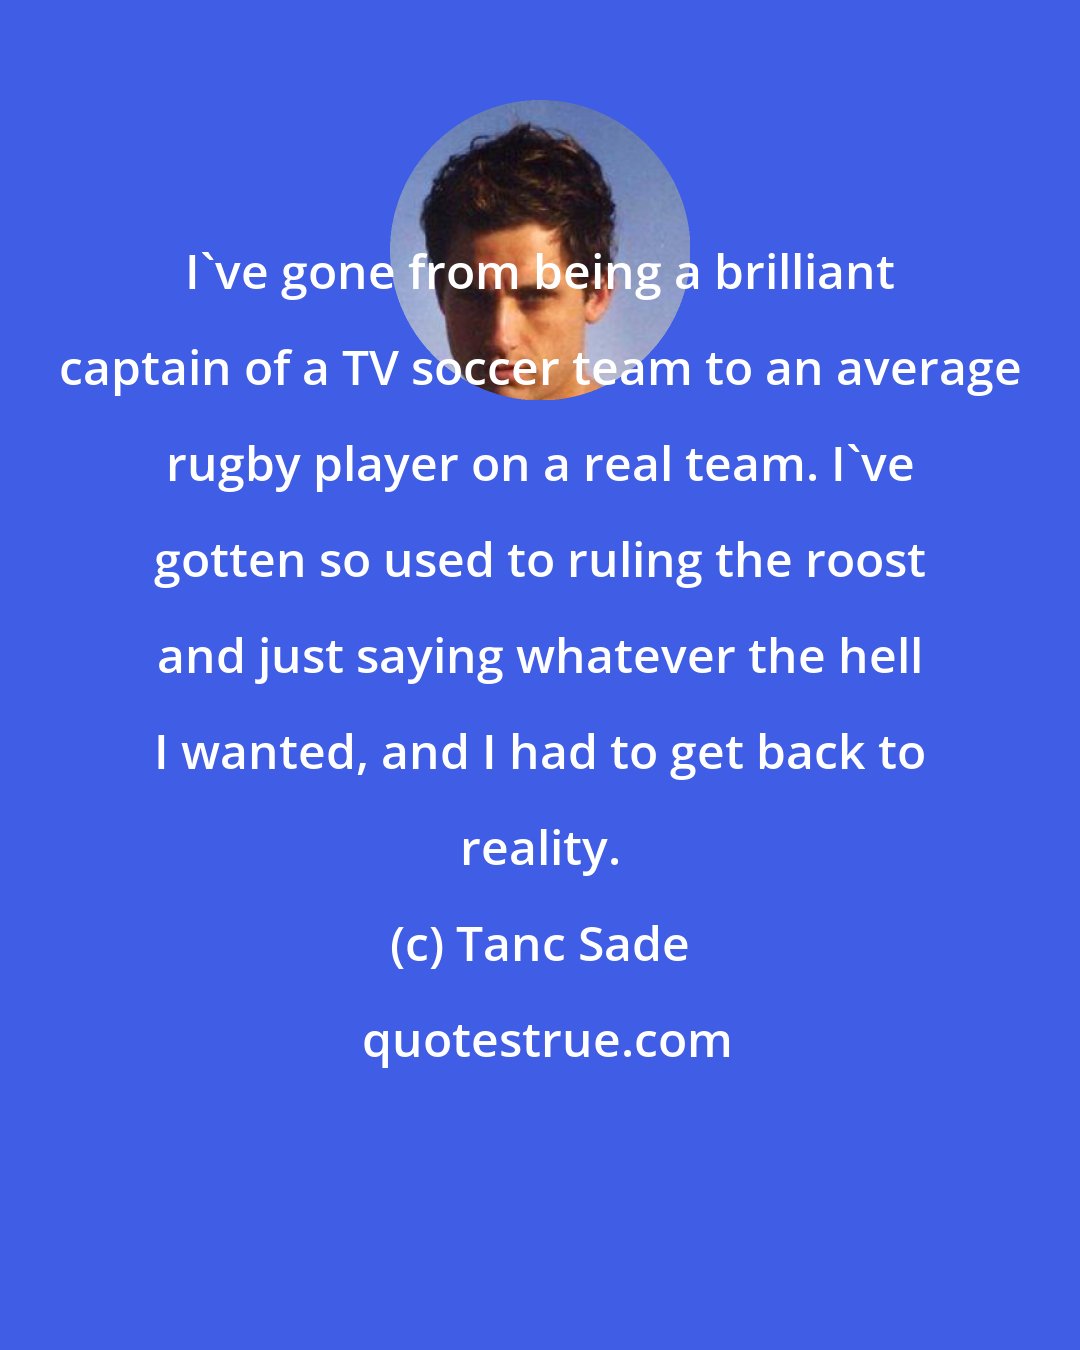 Tanc Sade: I've gone from being a brilliant captain of a TV soccer team to an average rugby player on a real team. I've gotten so used to ruling the roost and just saying whatever the hell I wanted, and I had to get back to reality.